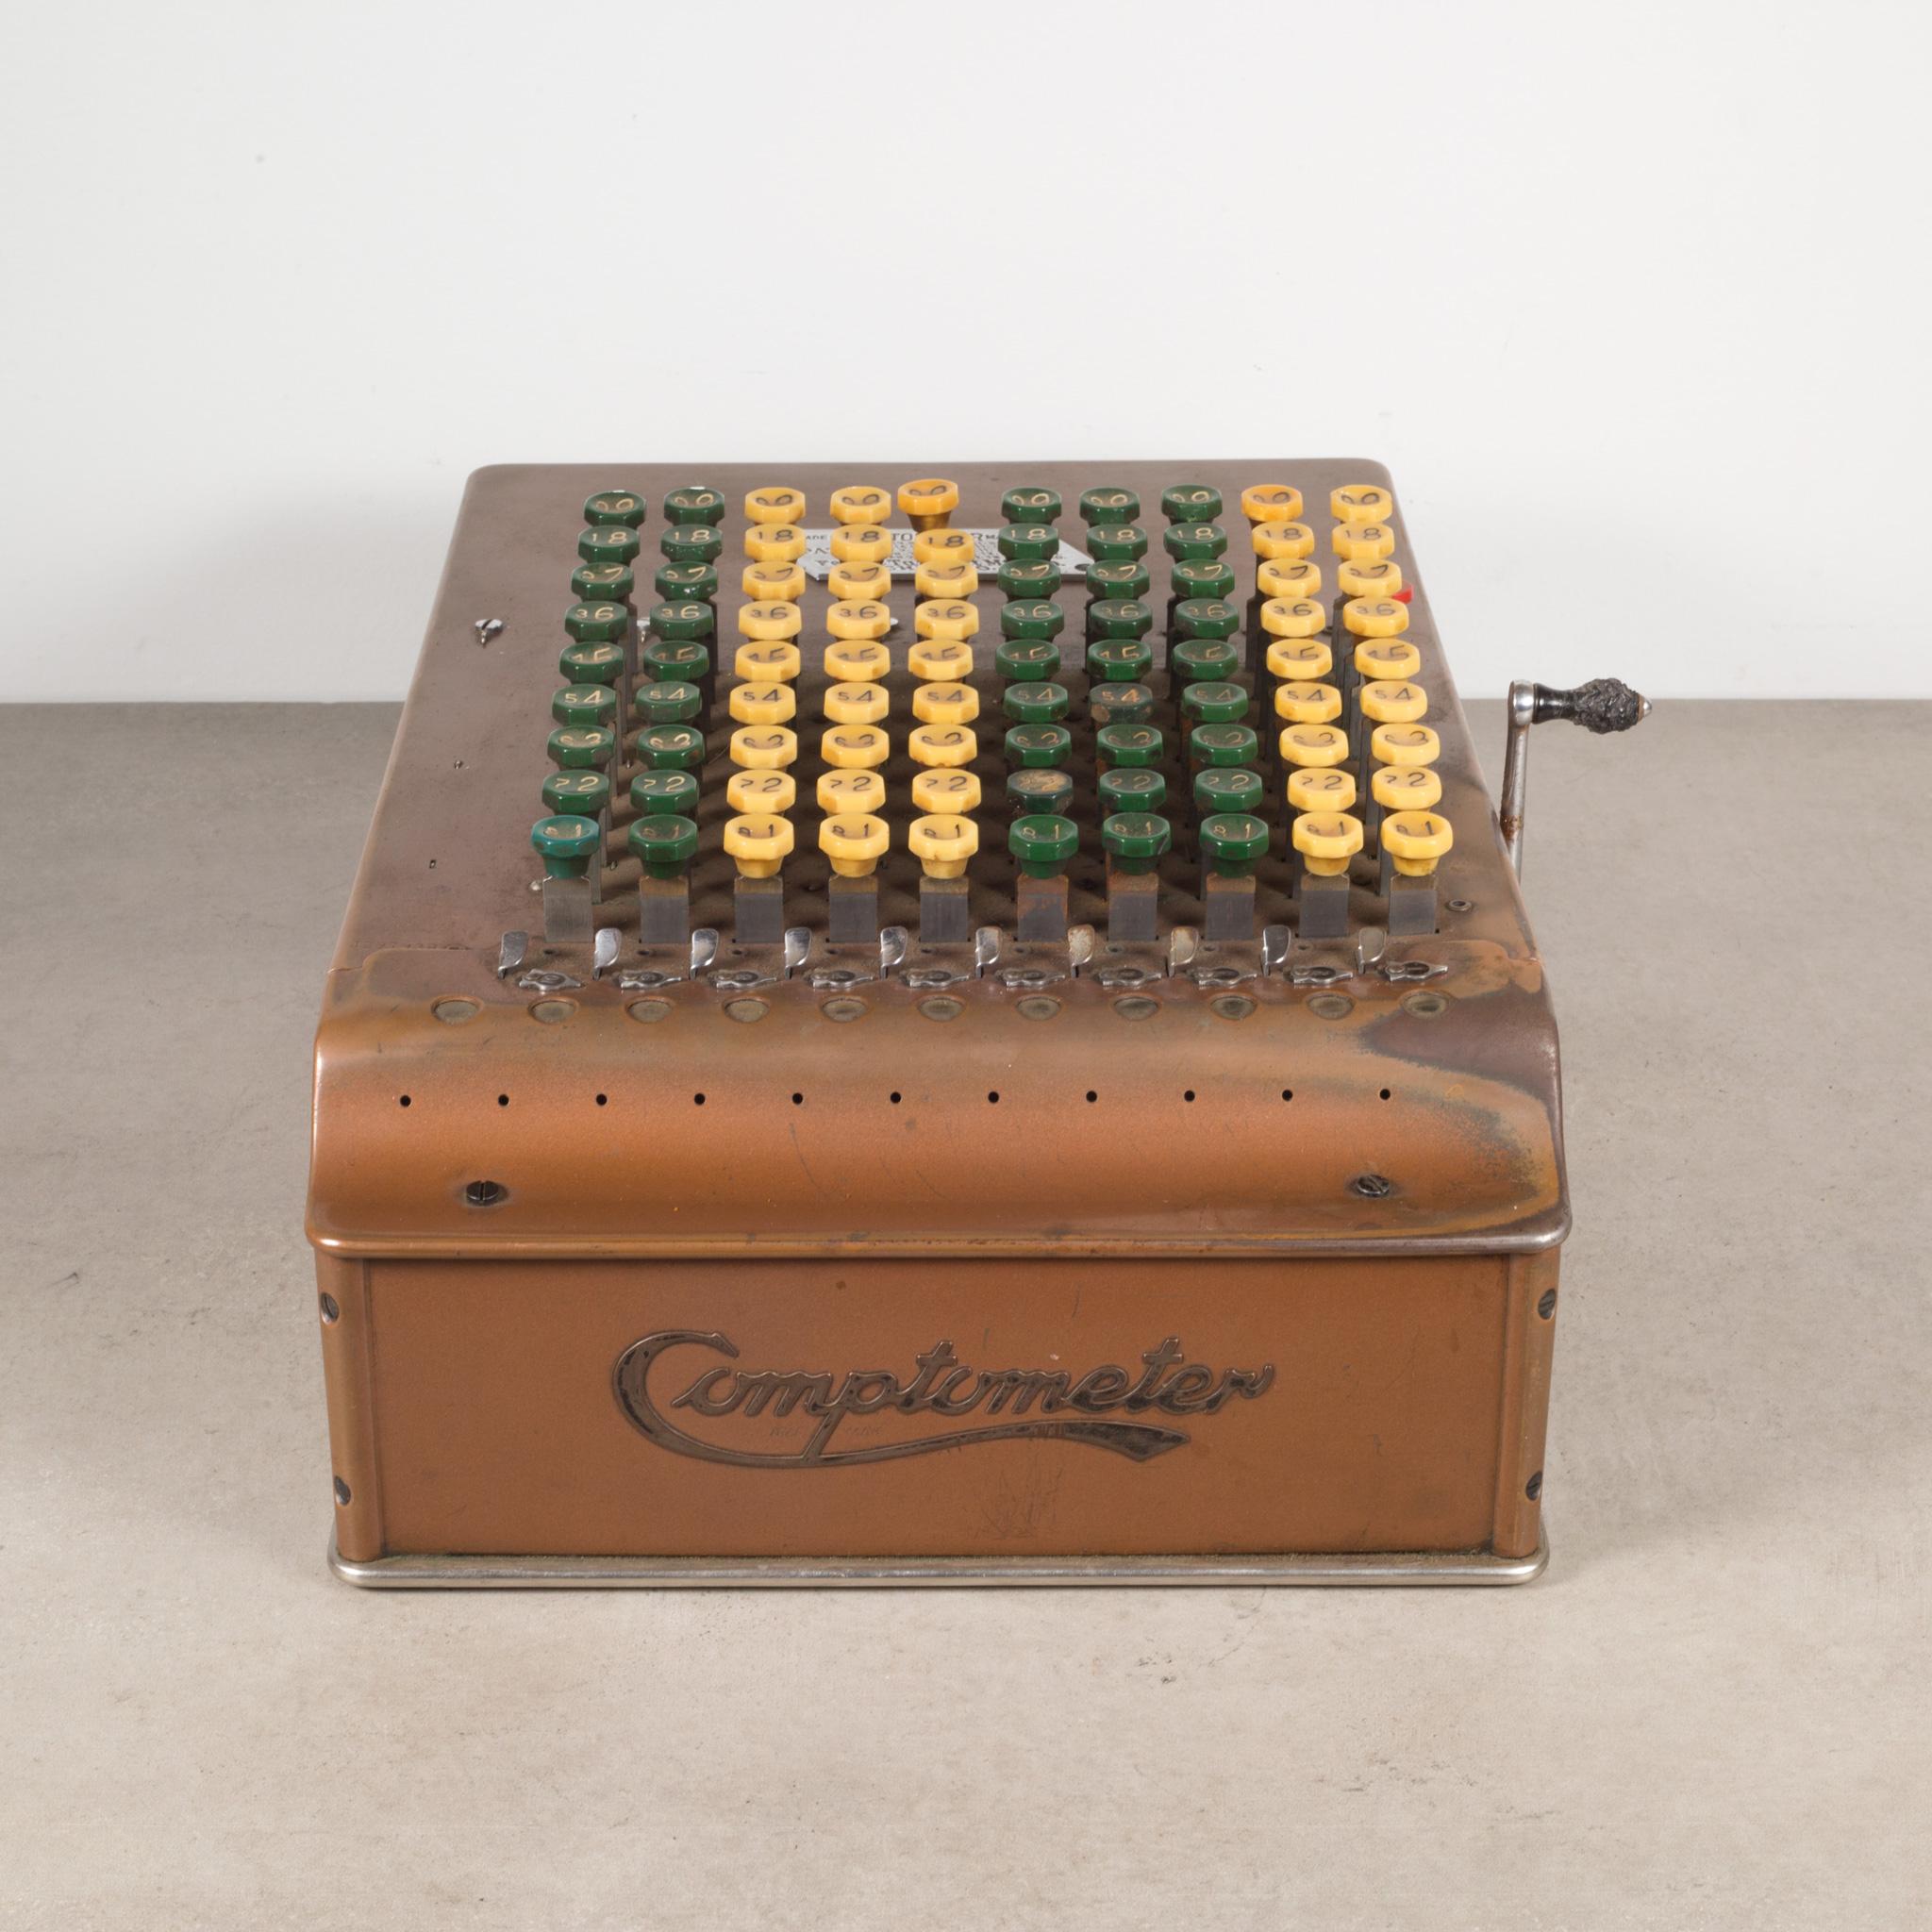 Industrial Early 20th C. Copper and Bakelite Adding Machine c.1904-1922  (FREE SHIPPING) For Sale